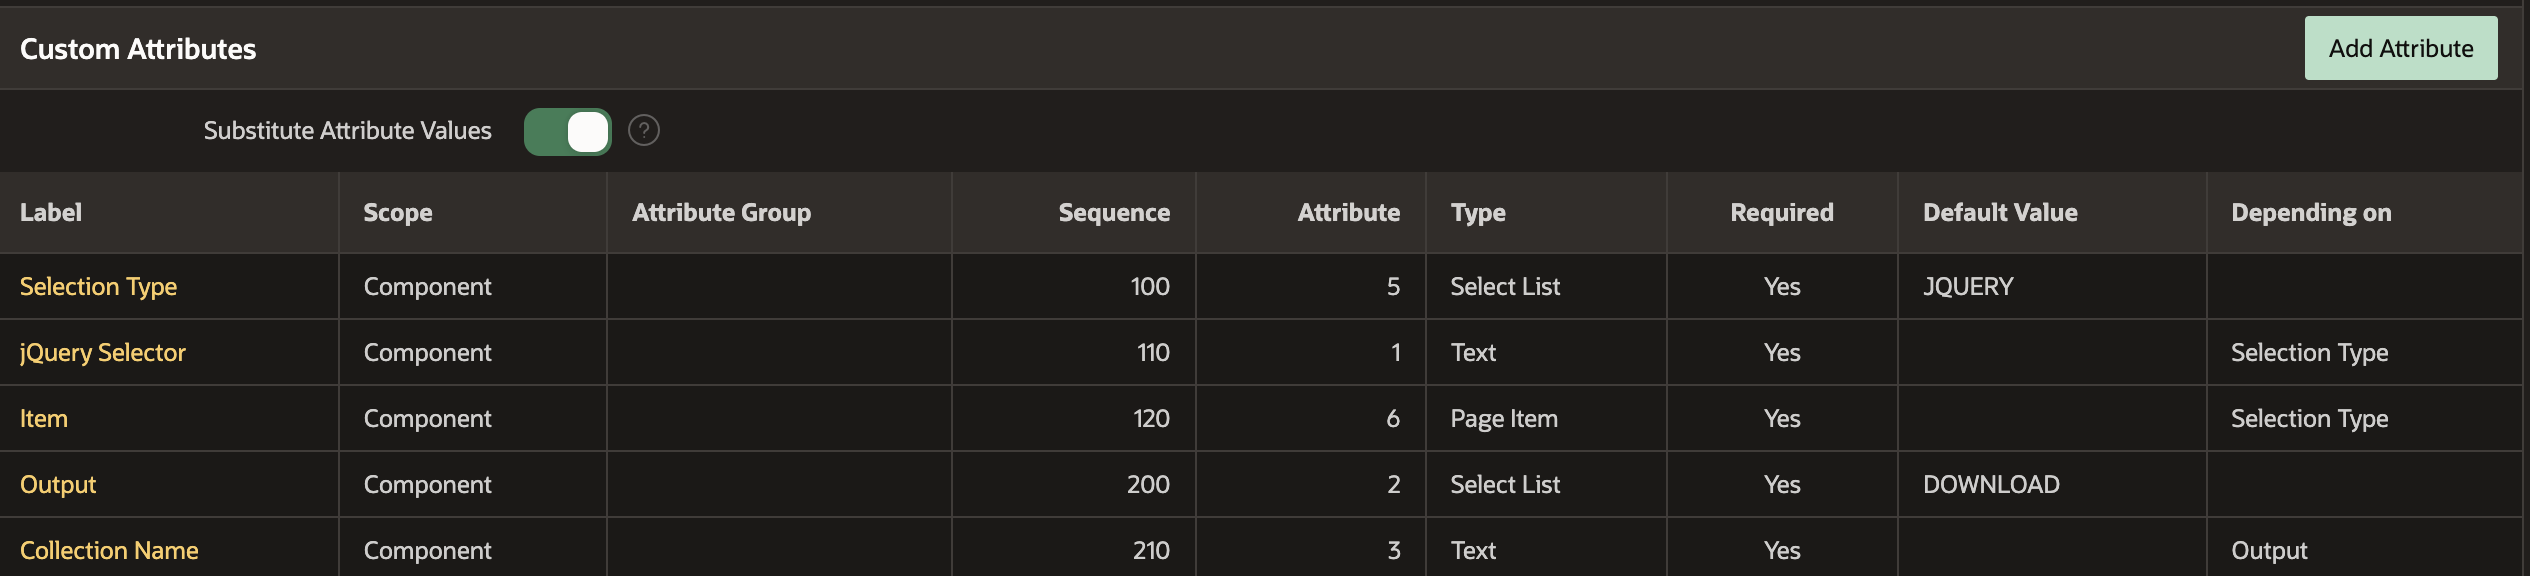 Screenshot of Oracle APEX showing a list of Custom Attributes used by our plug-in